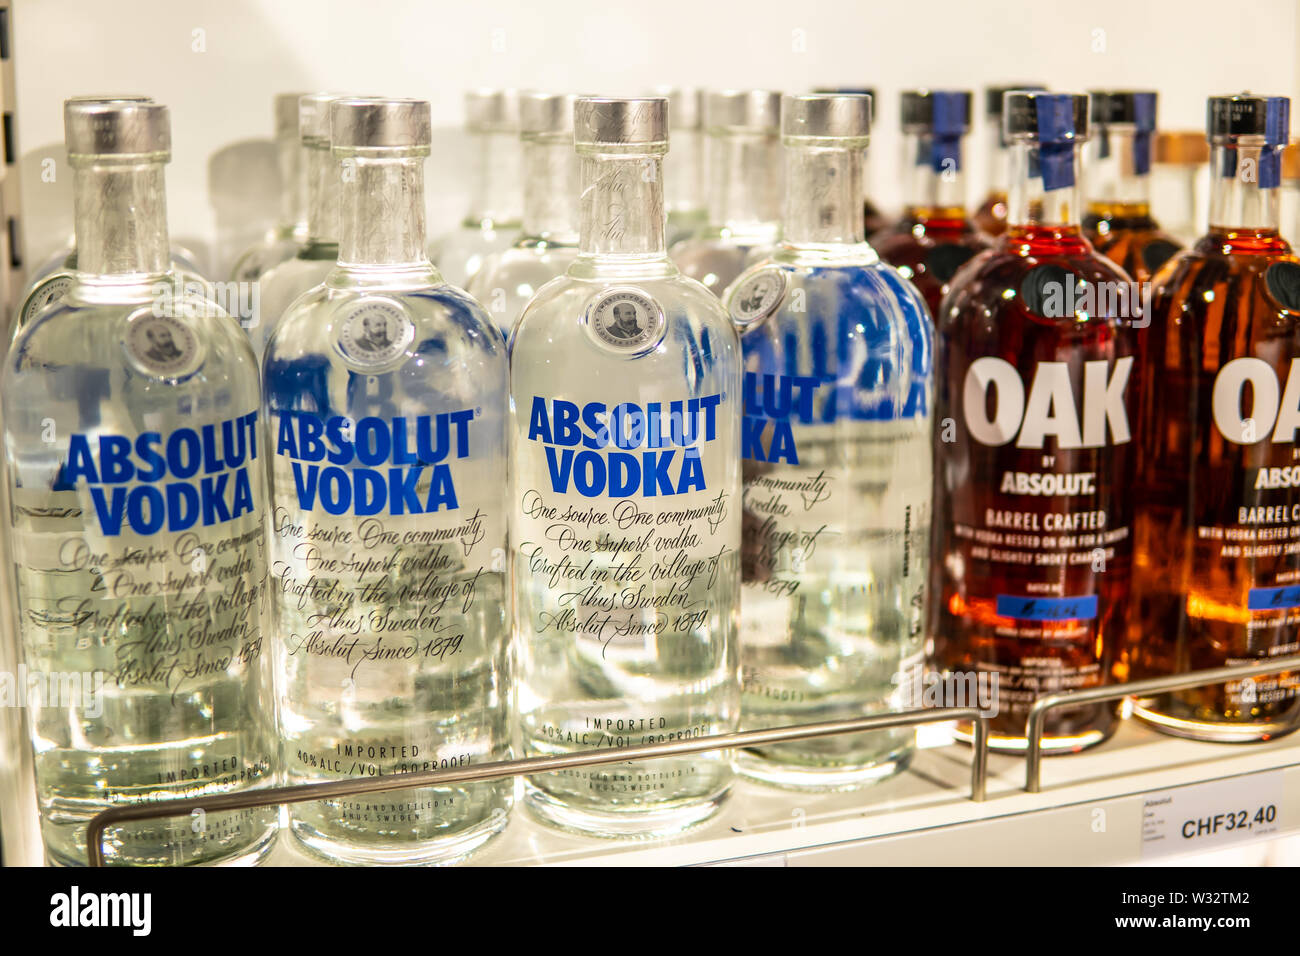 Geneva, March 2019 Bottles of Absolut Vodka on display for sale, brand of vodka produced in Sweden. Owned by Pernod Ricard brand of alcoholic spirits Stock Photo